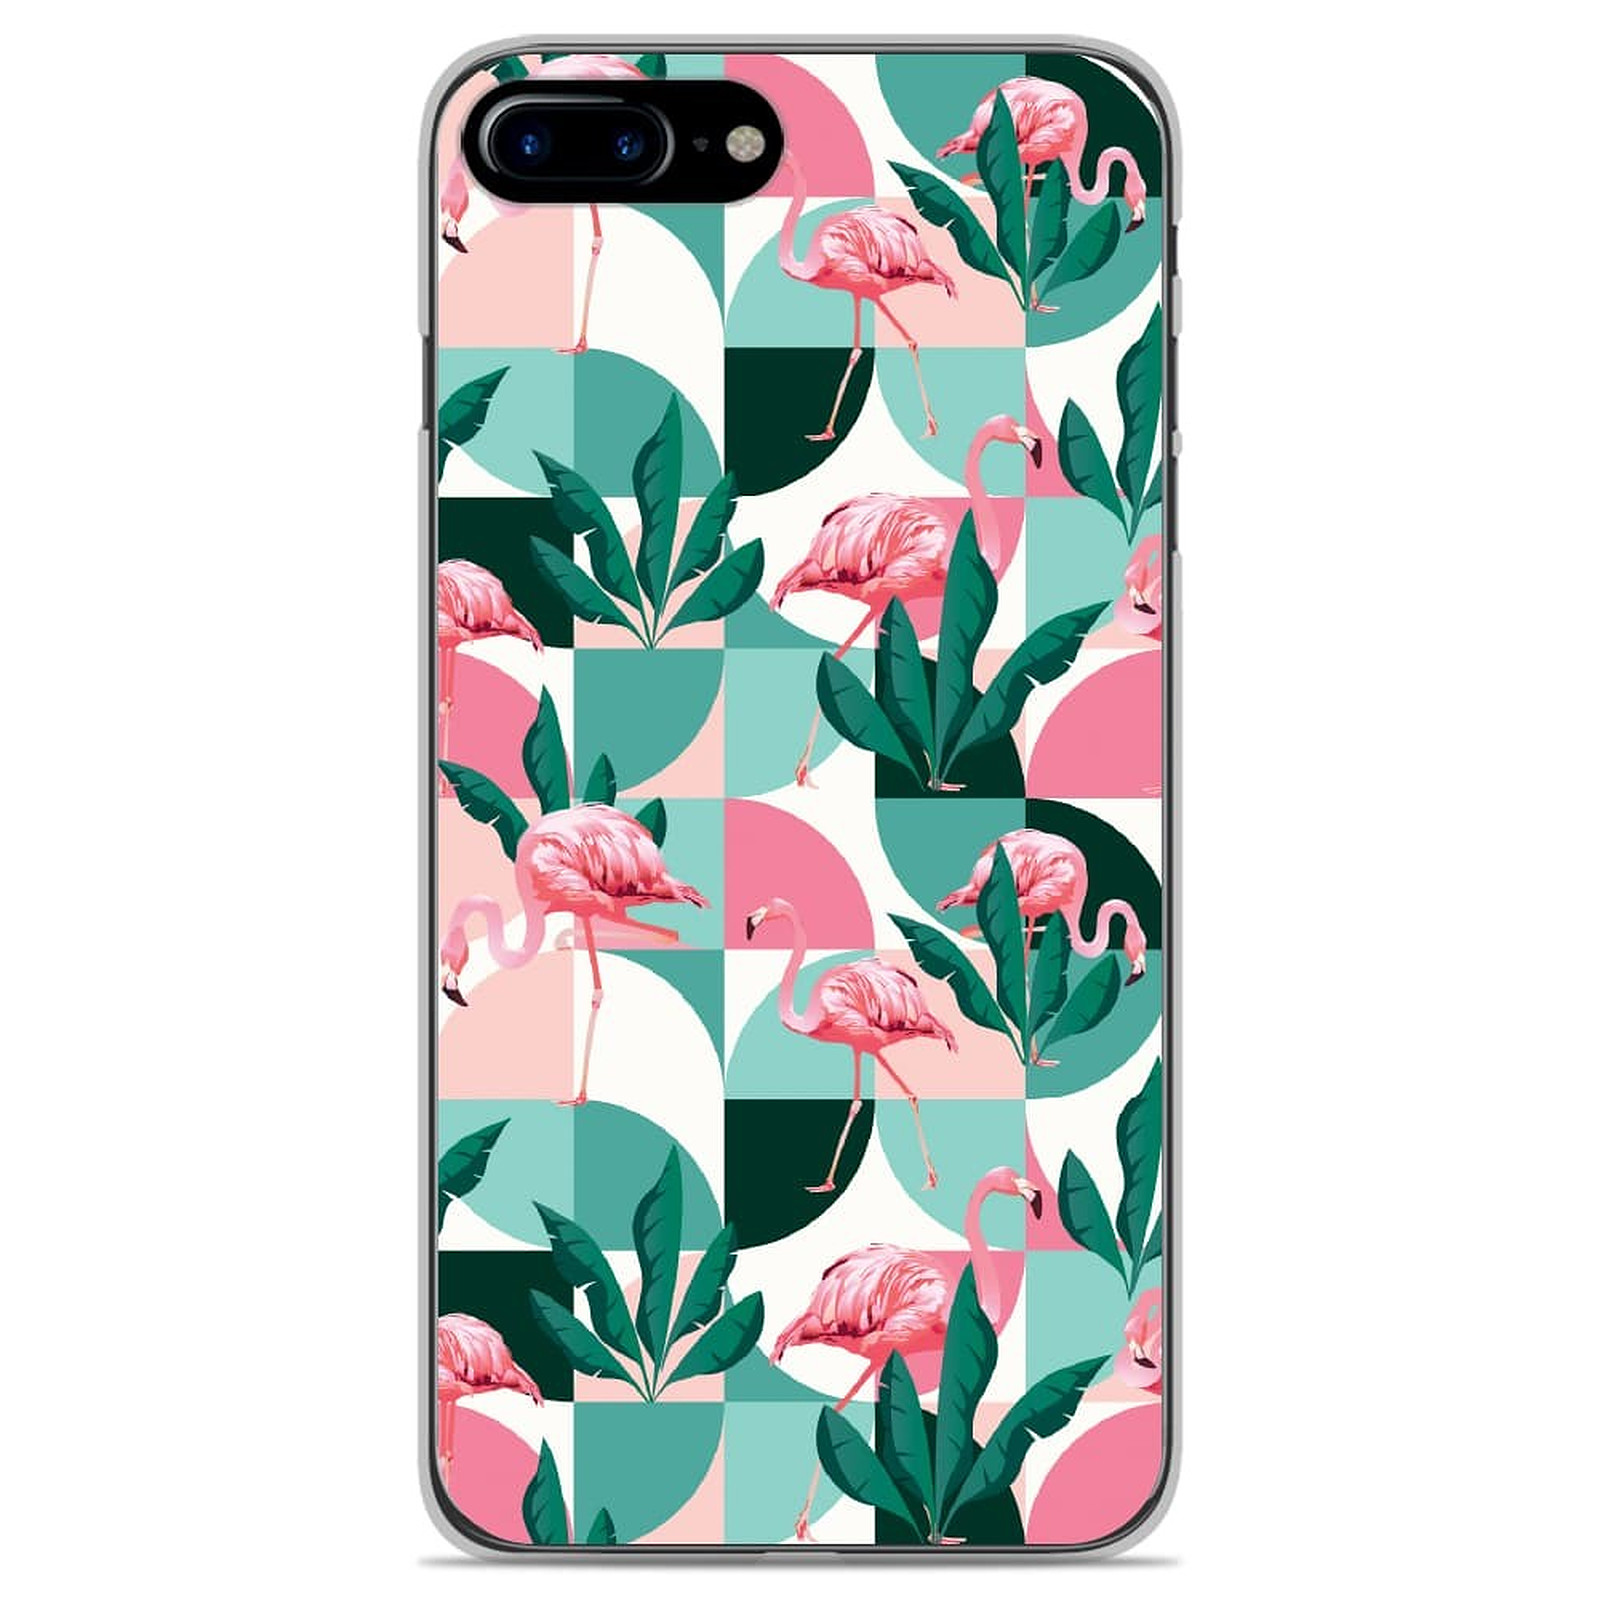 1001 Coques Coque silicone gel Apple iPhone 7 Plus motif Flamants Roses ge´ome´trique - Coque telephone 1001Coques